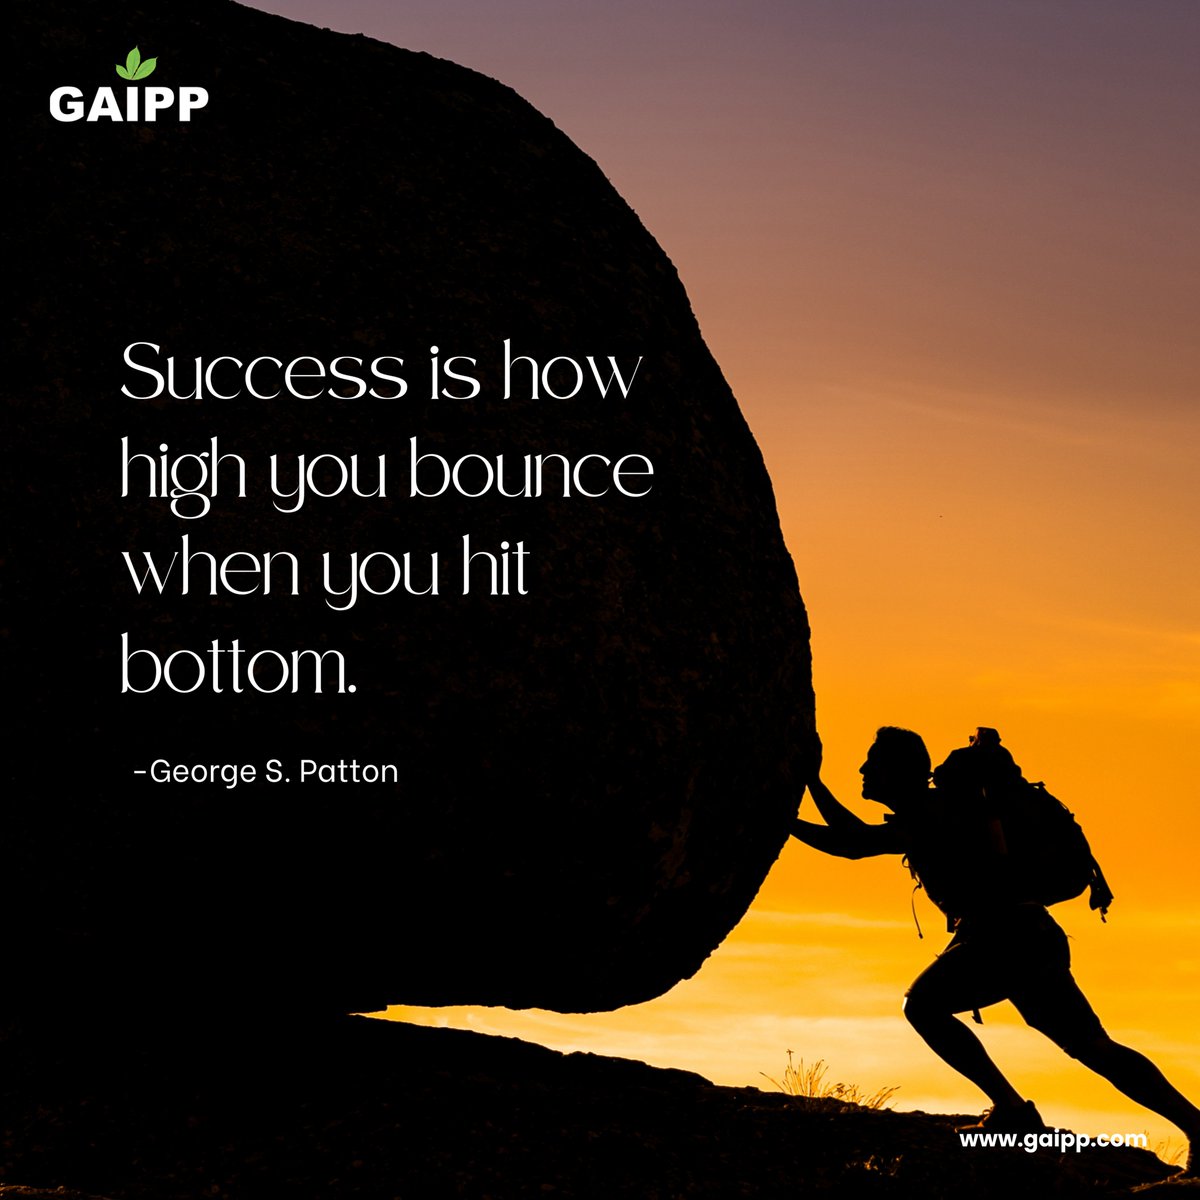 Success is not solely defined by avoiding failure, but rather by how resiliently you rise after hitting rock bottom. 

#SuccessMatters #ResilienceRising #Gaipp #LearnFromFailure #PersevereToSucceed #StrongerEveryDay #NeverGiveUp #EmbraceChallenges